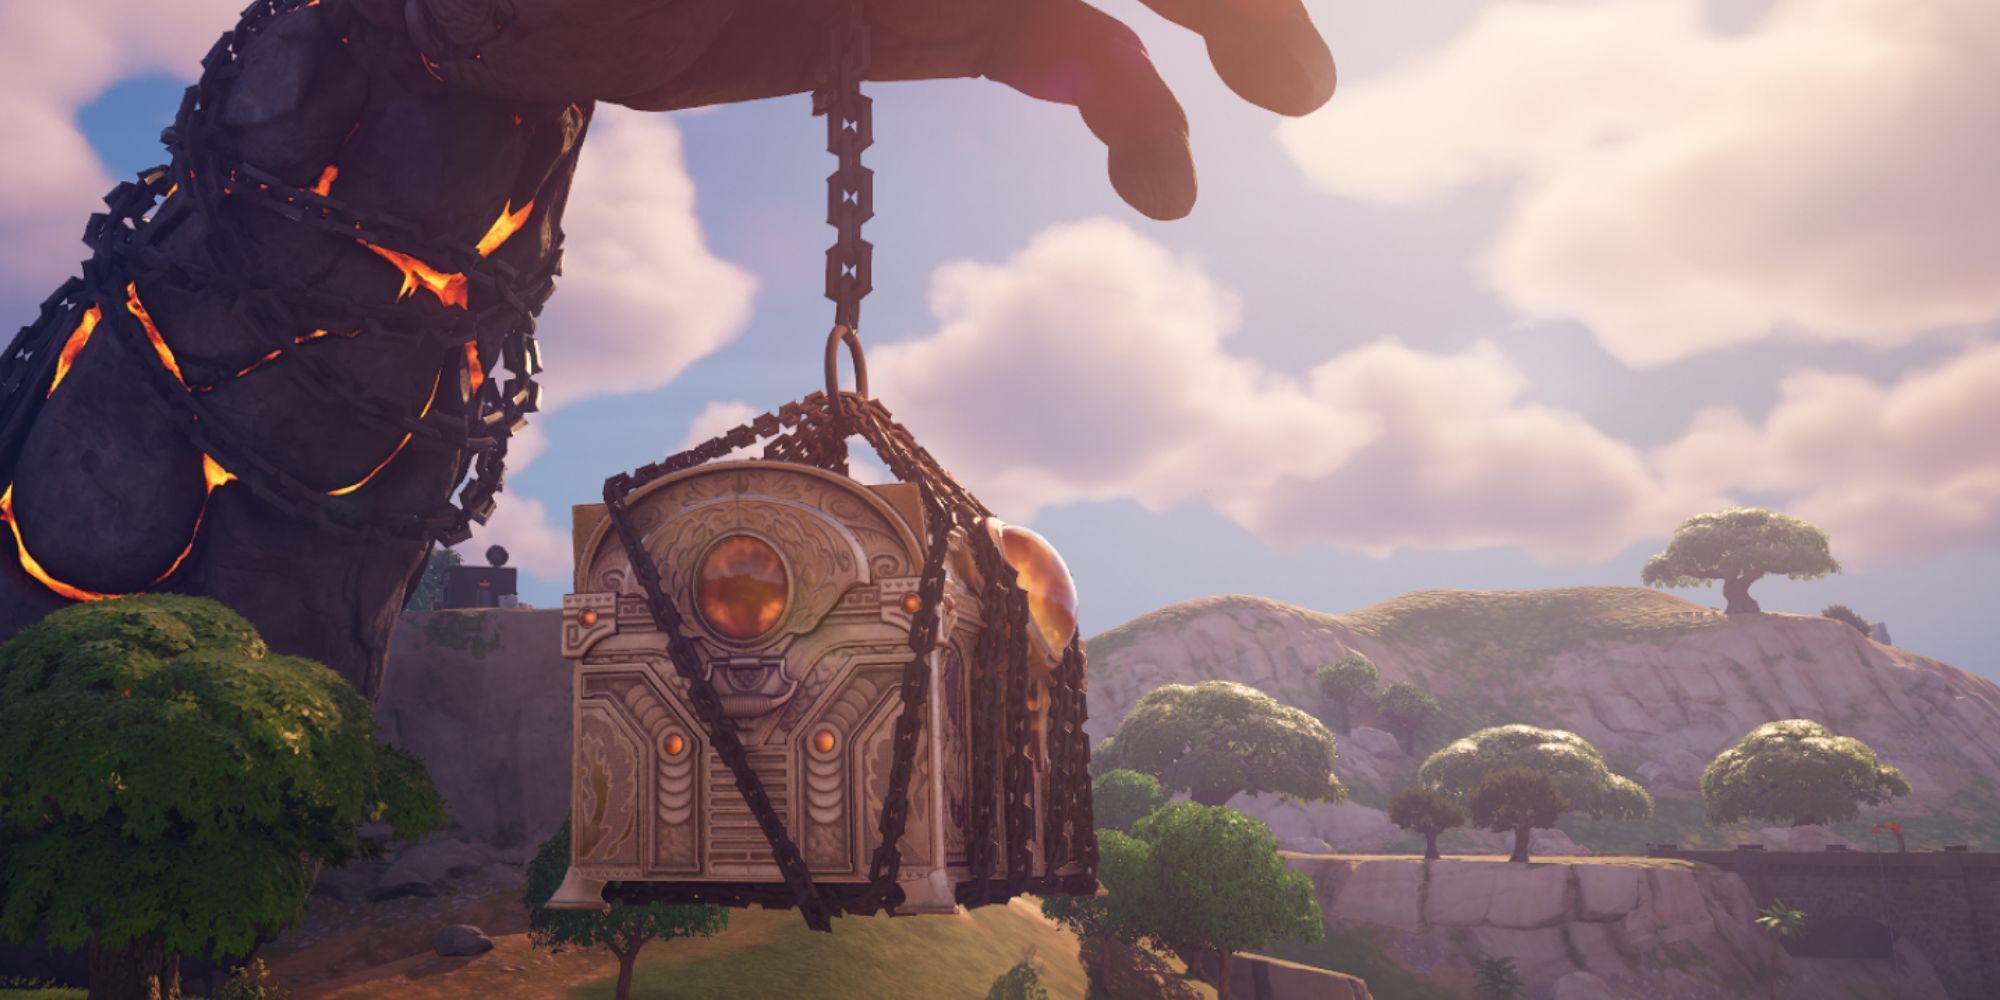 Pandora's Box in Fortnite, being held up by chains attatched to a stone hand